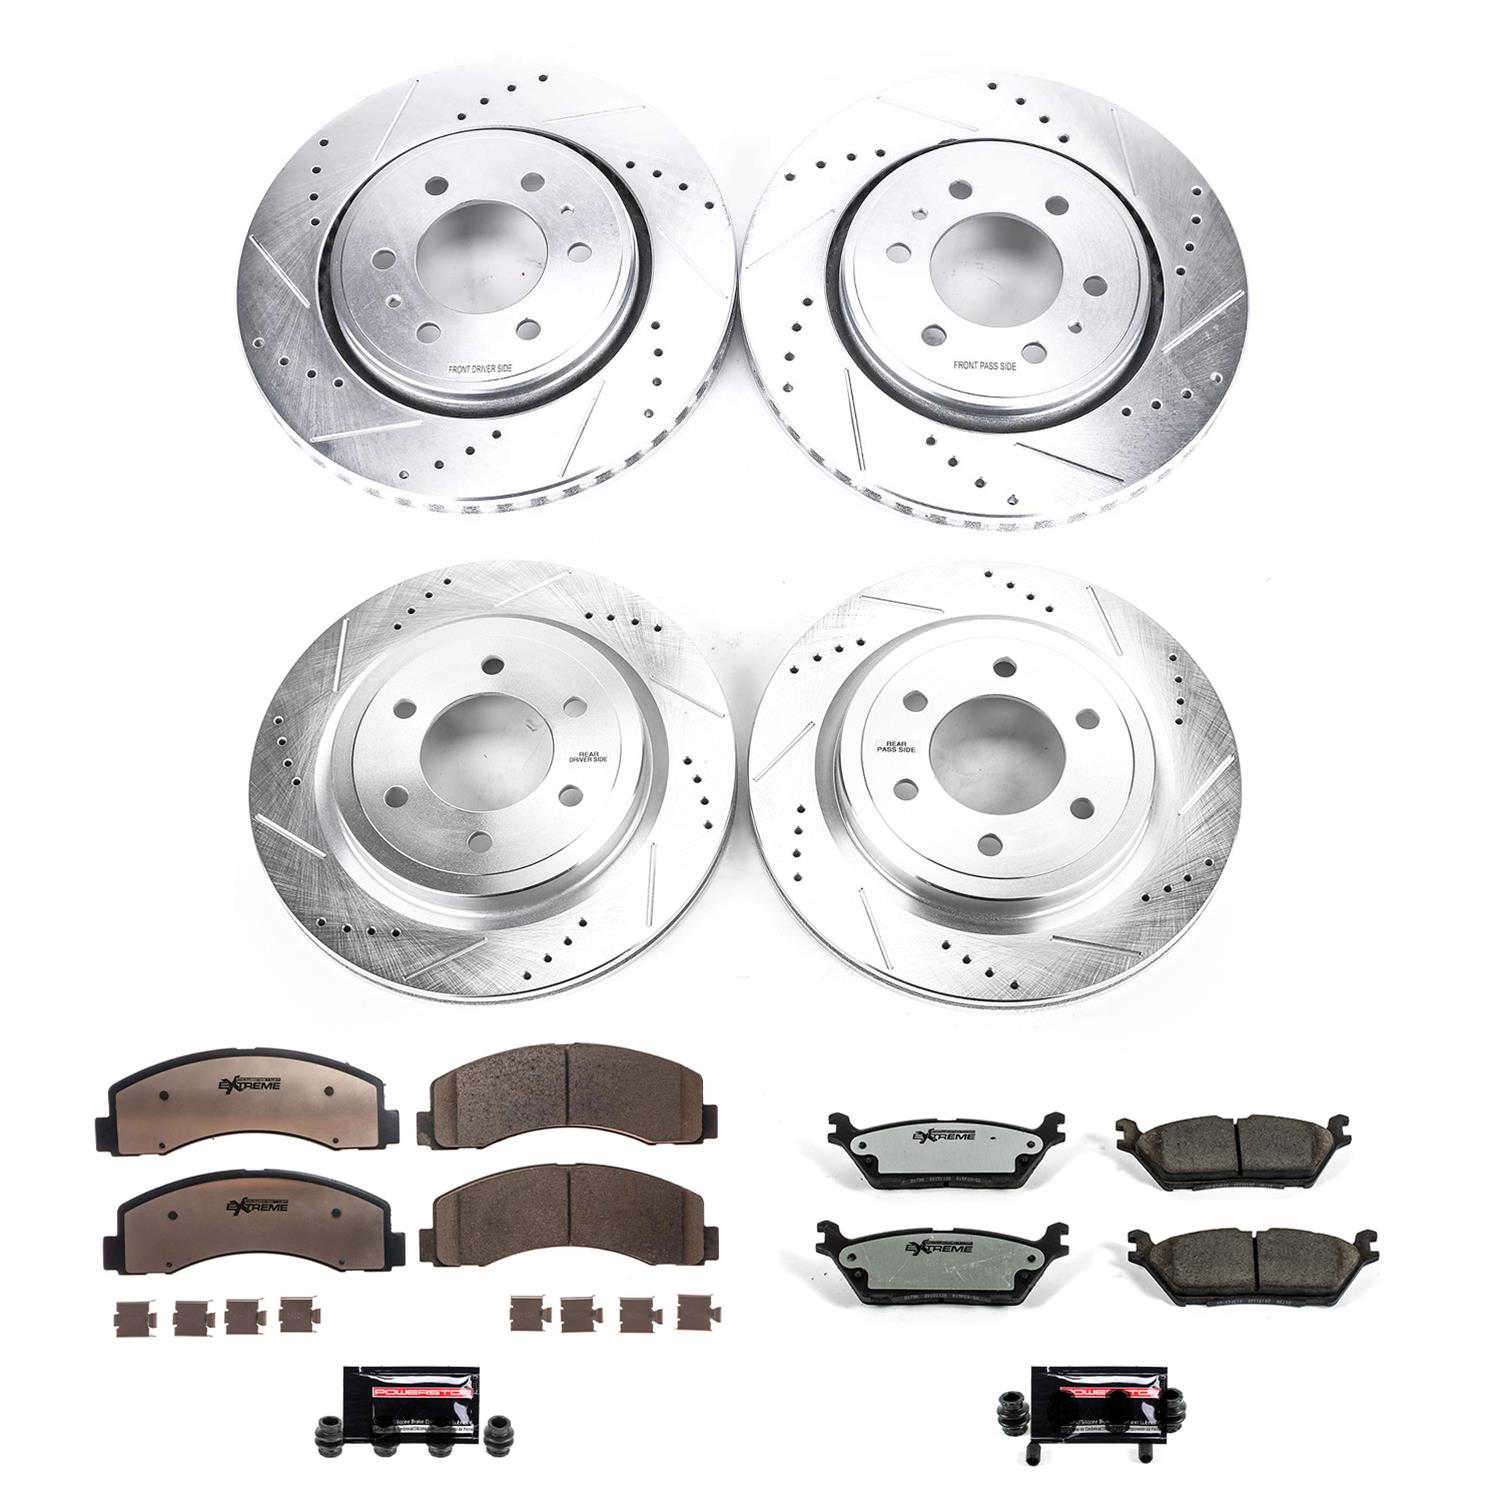 Power Stop Z36 Truck and Tow Brake Upgrade Kits K8026-36